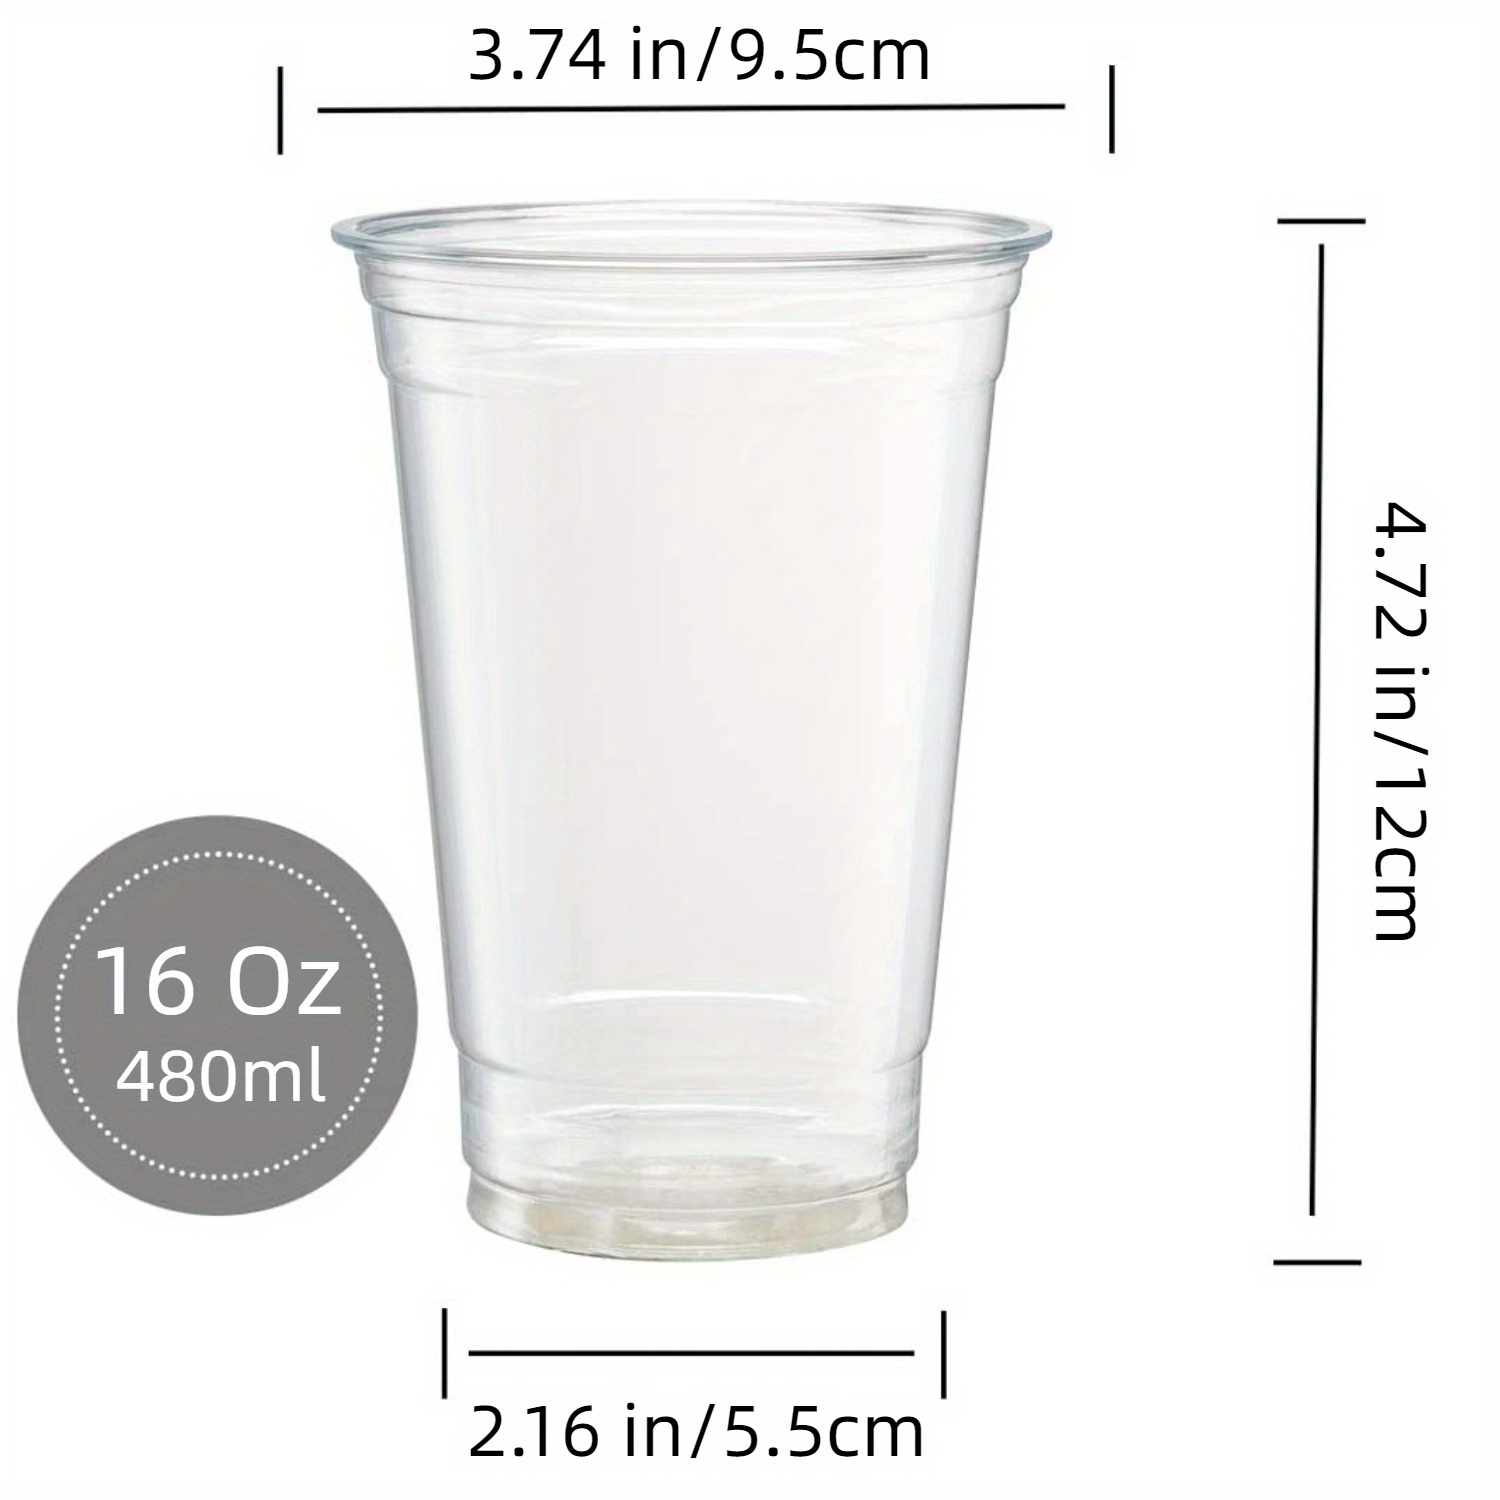 48 Wholesale Plastic Party Cups 16 Ounce 16 Count - at 